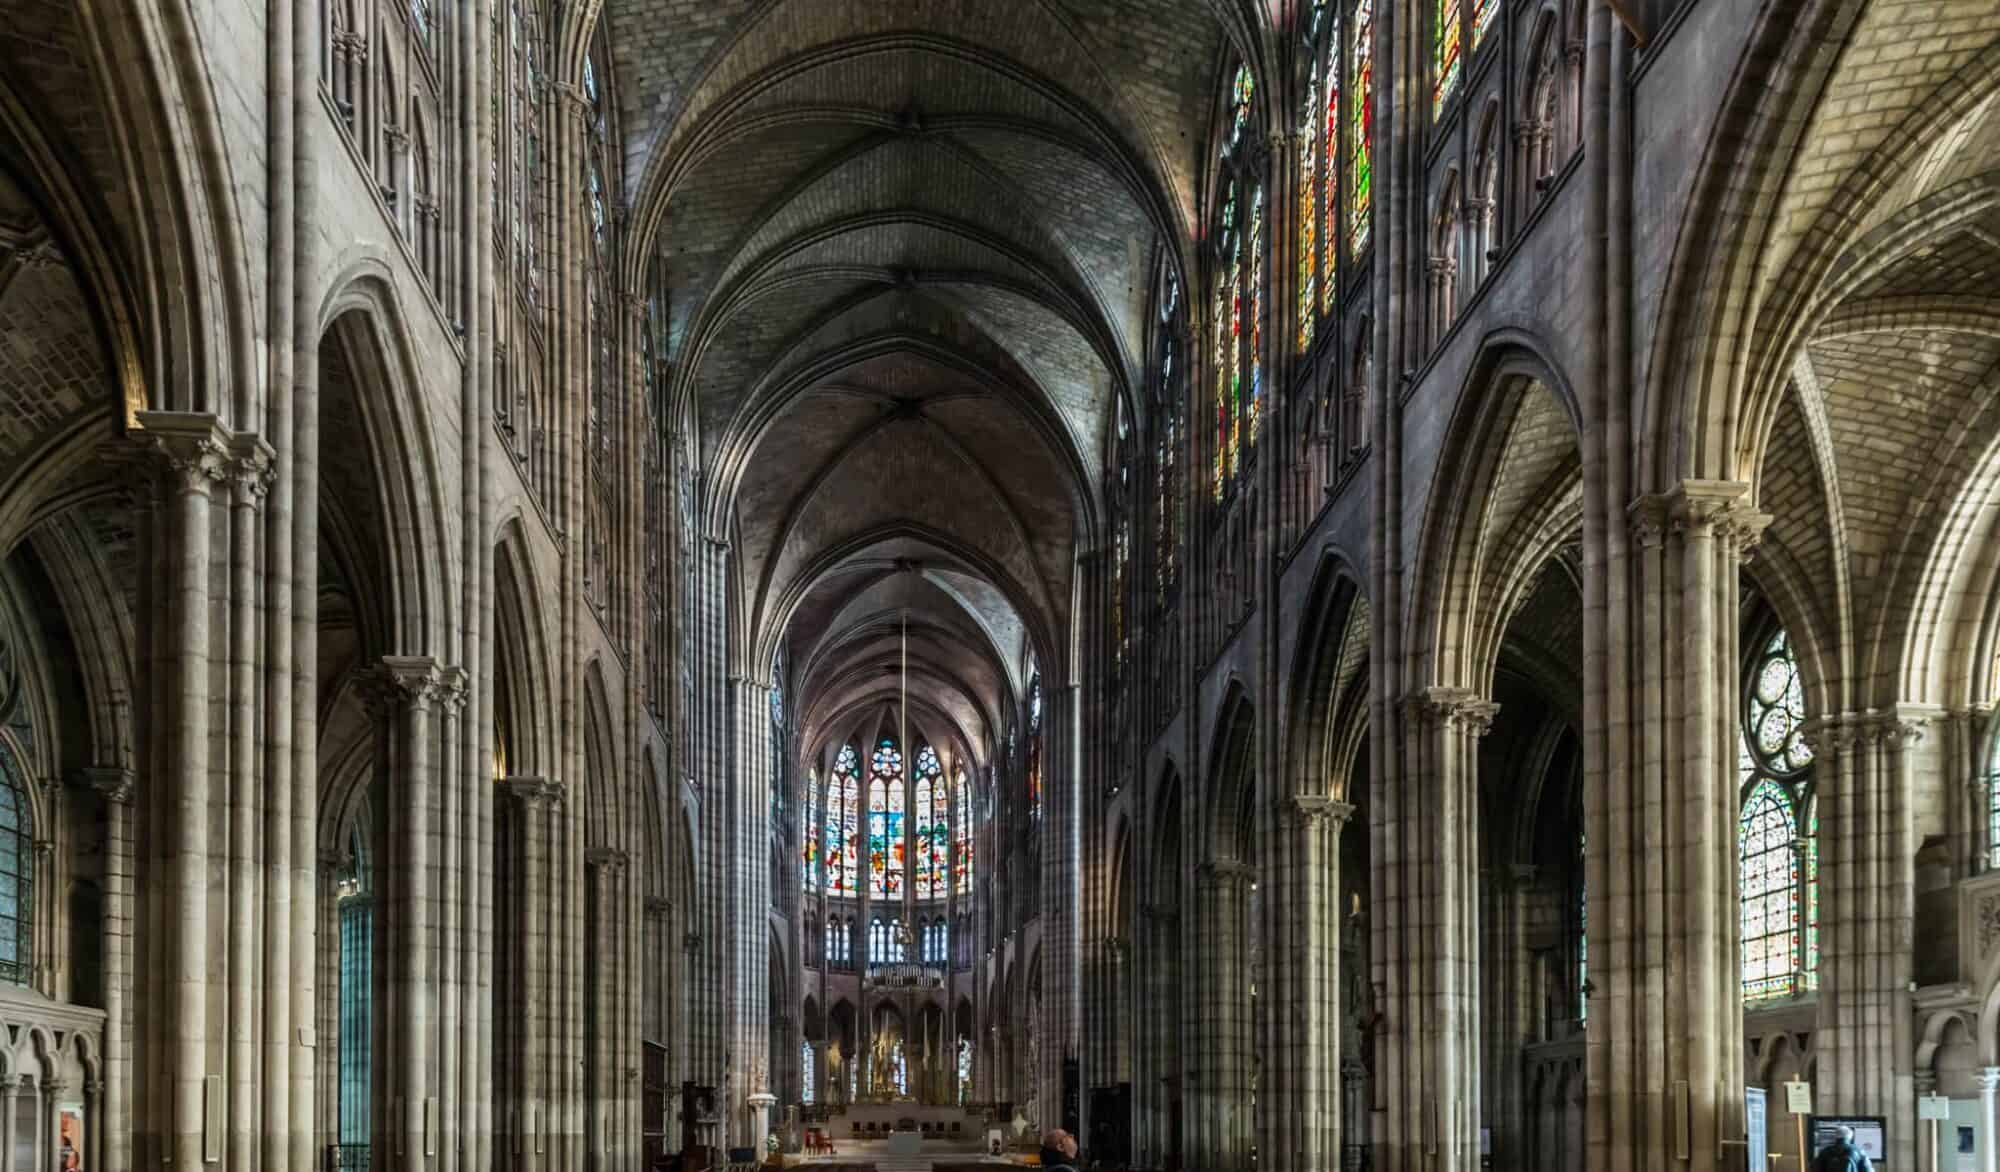 The interior of the Gothic Basilique Saint Denis in Paris with soaring ceilings, stained glass windows and stone interiors.